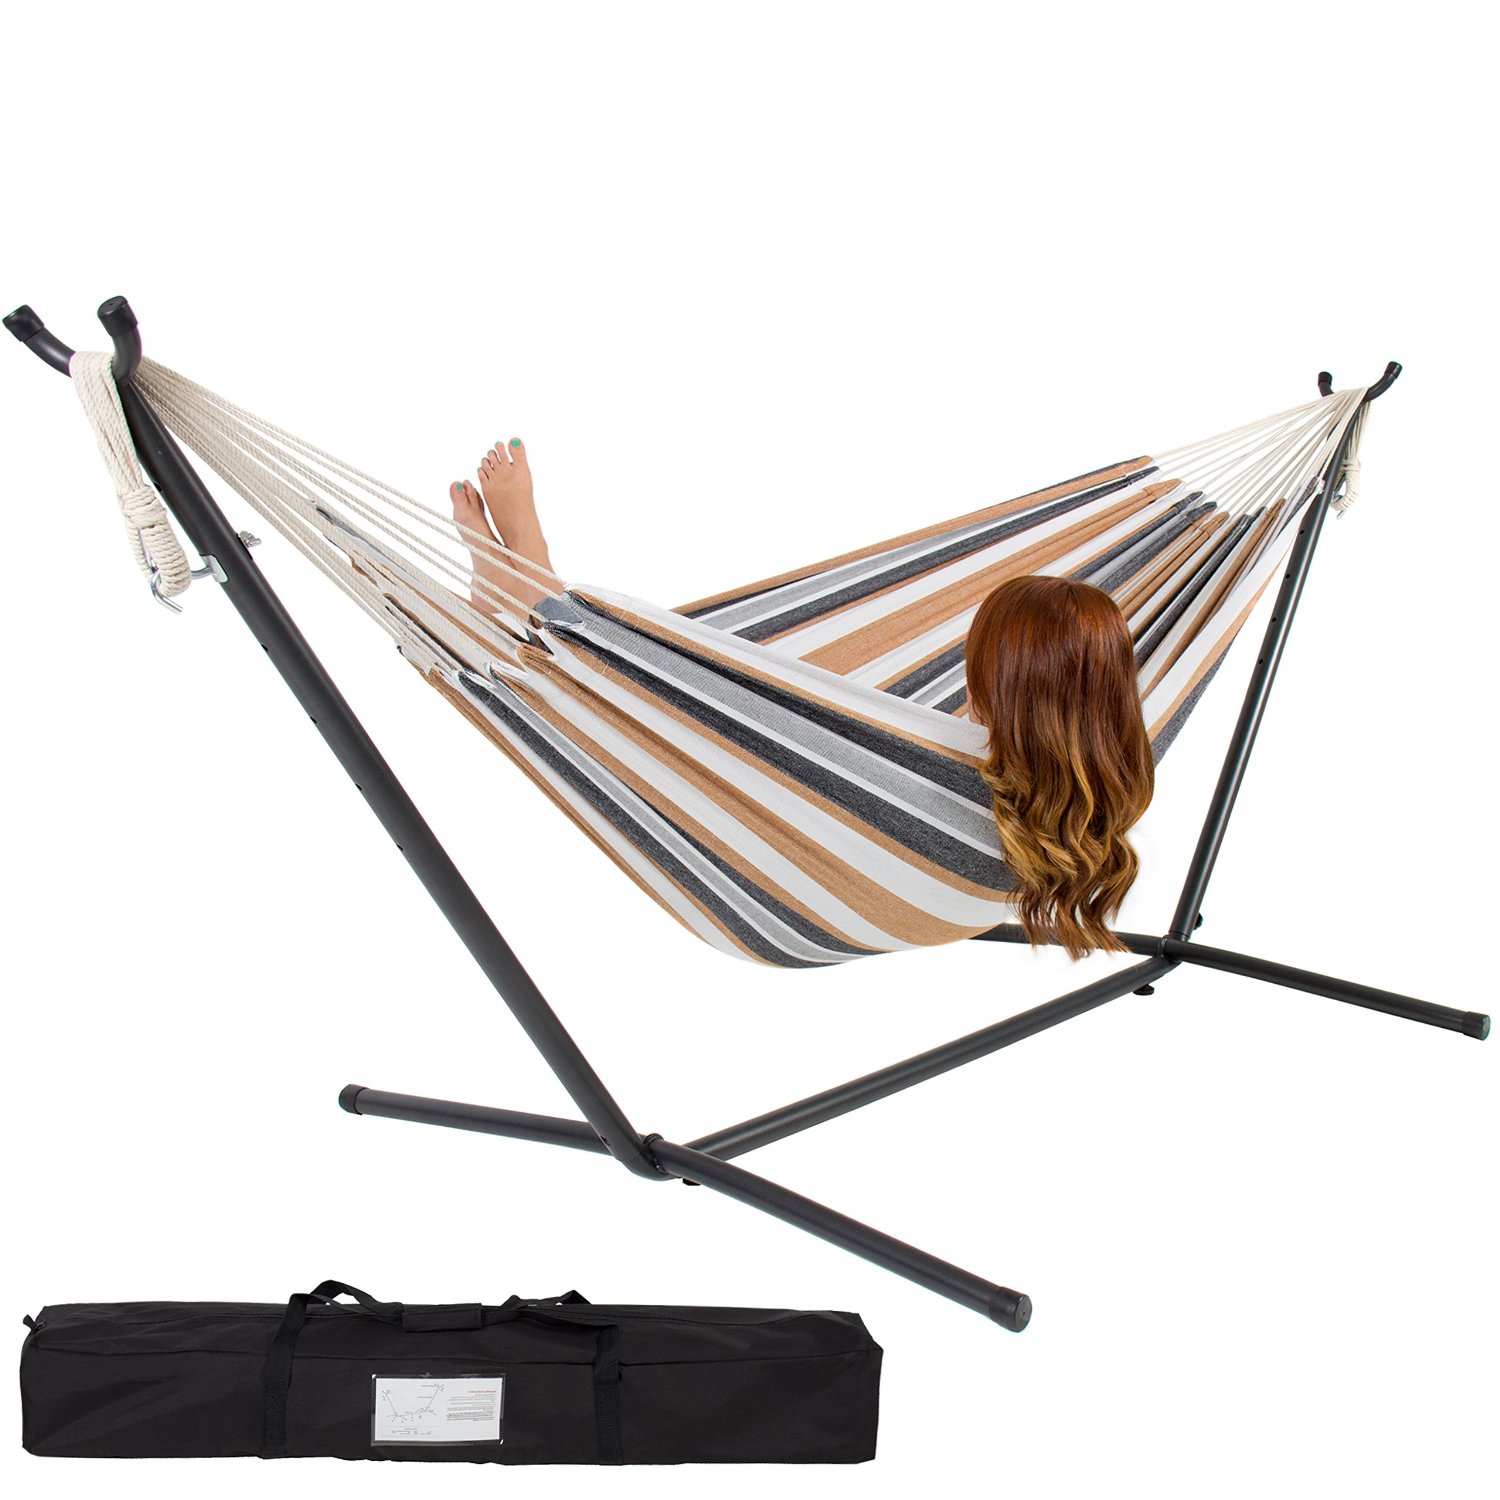 HOT SALES Cotton /Polyester Hammock Stand